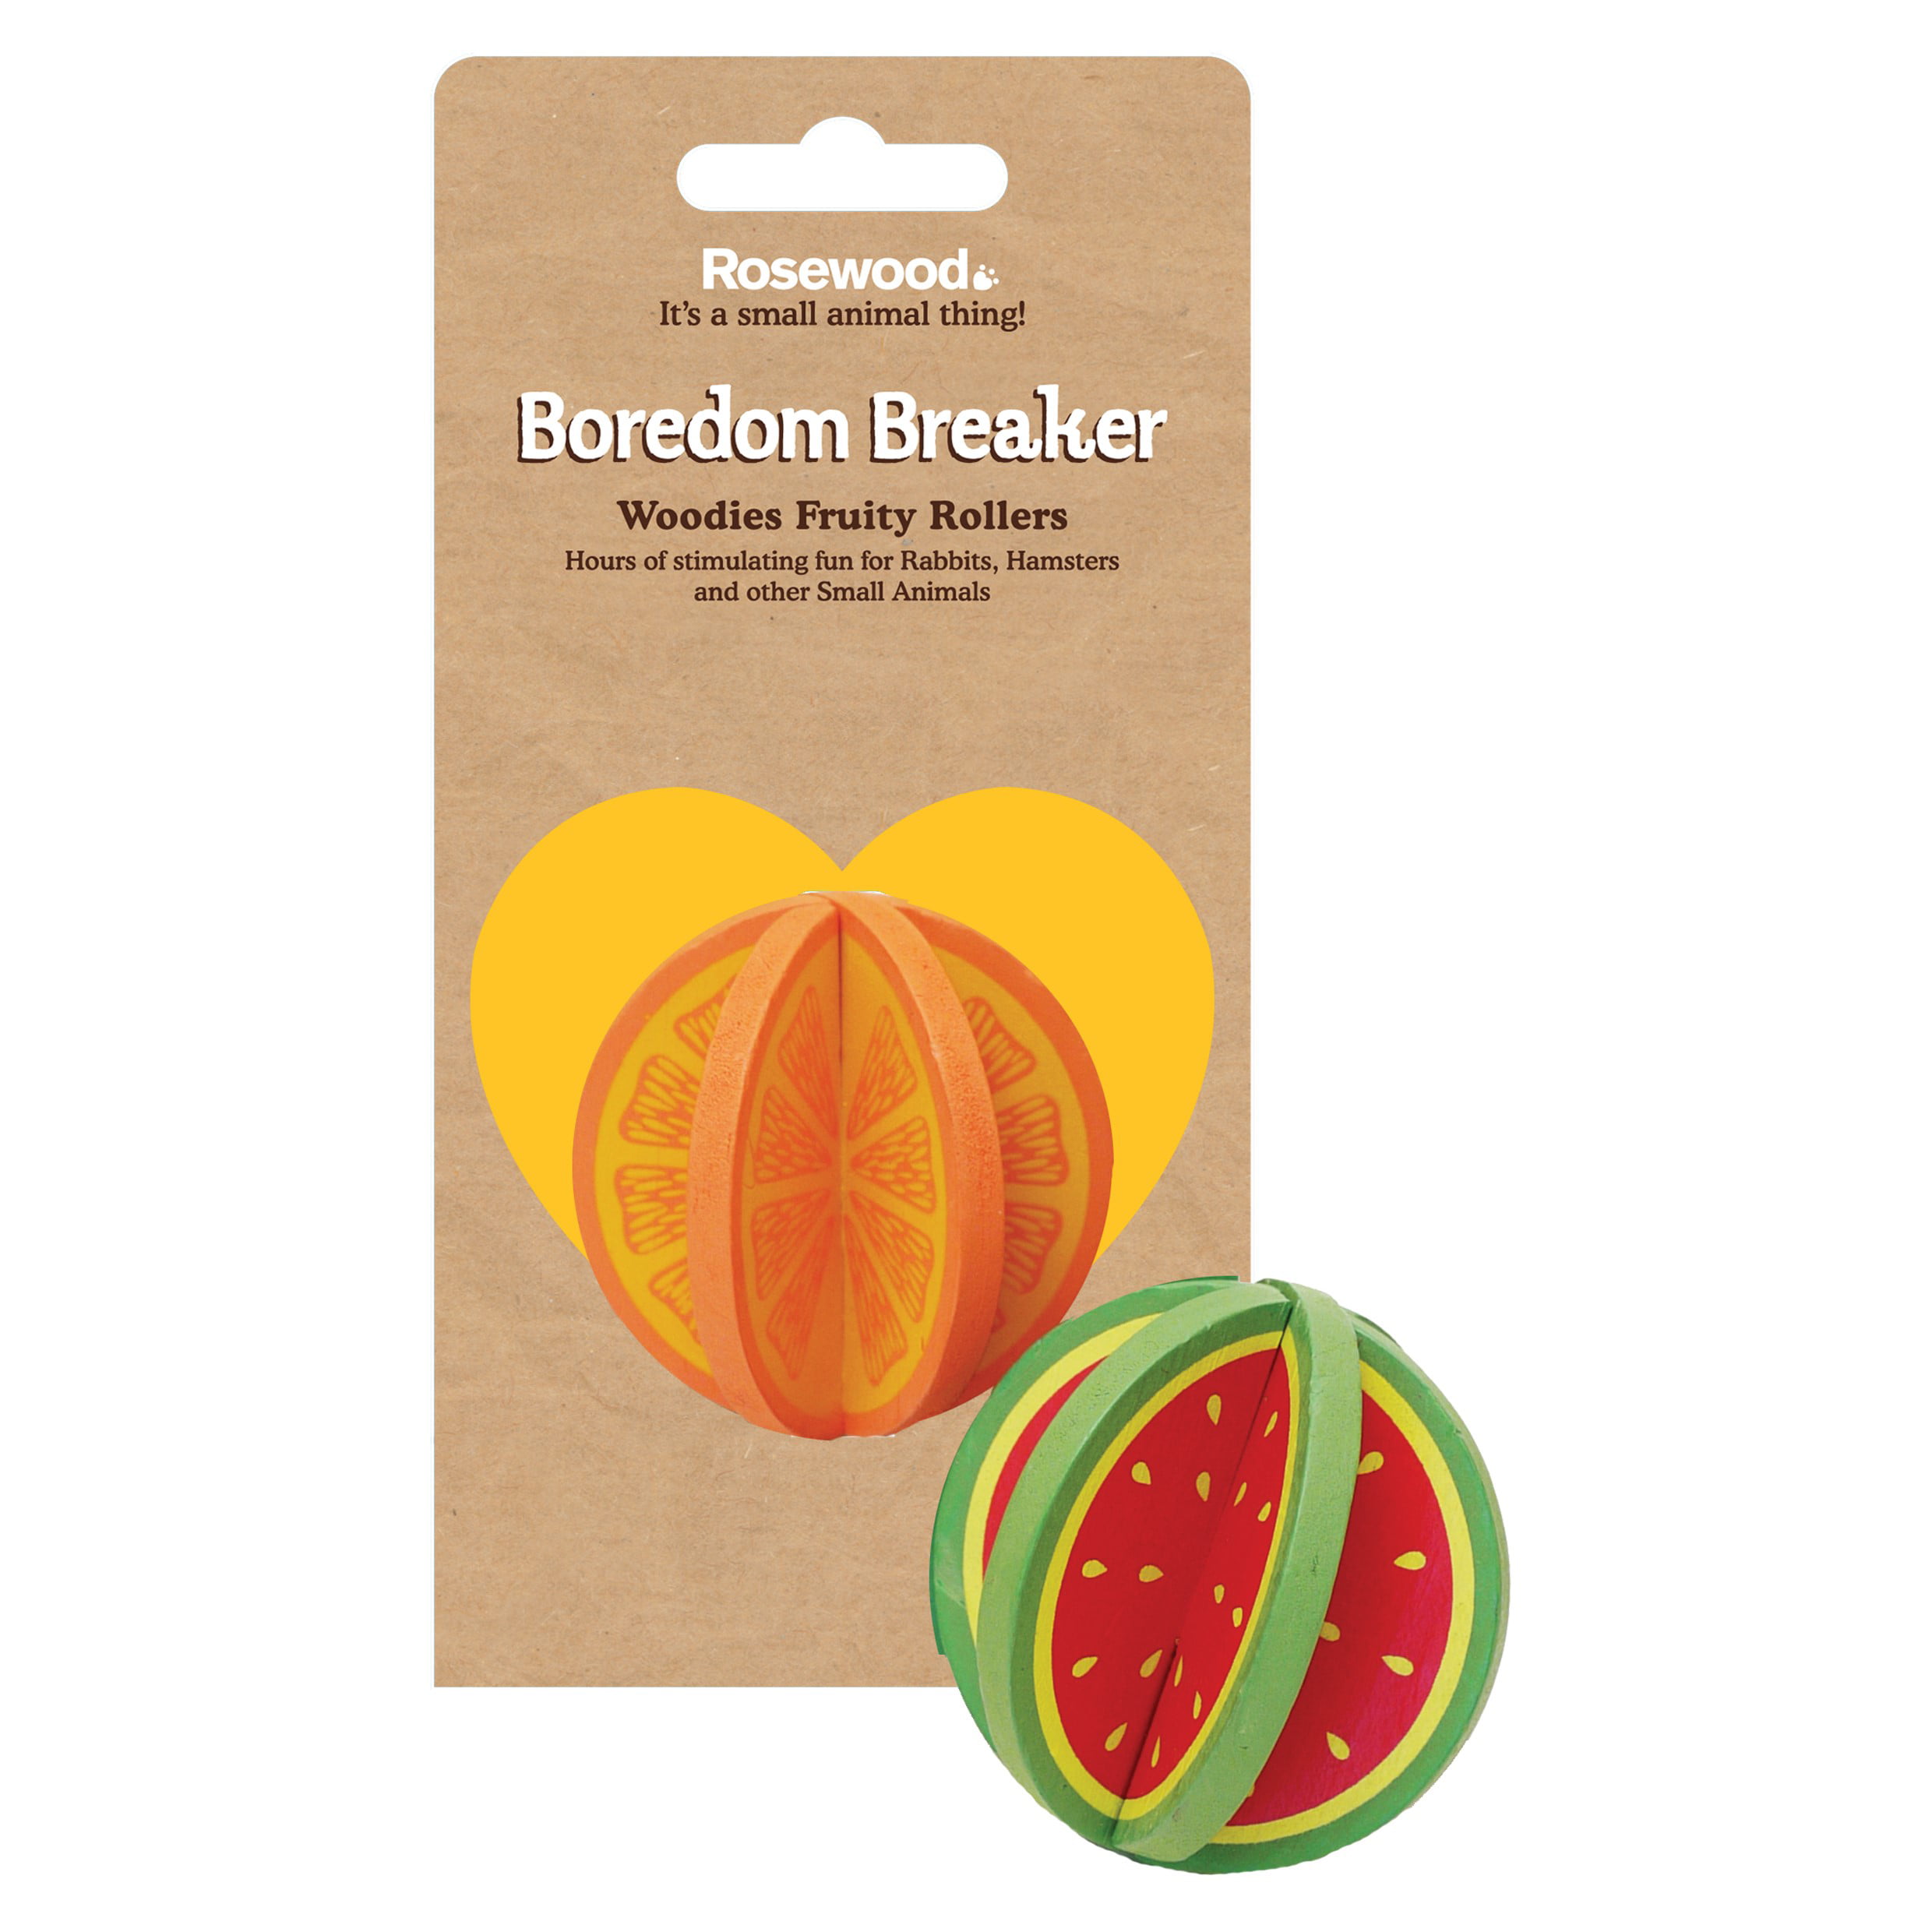 Rosewood Boredom Breaker Loofa Toss and Treat Roller for Small Animals